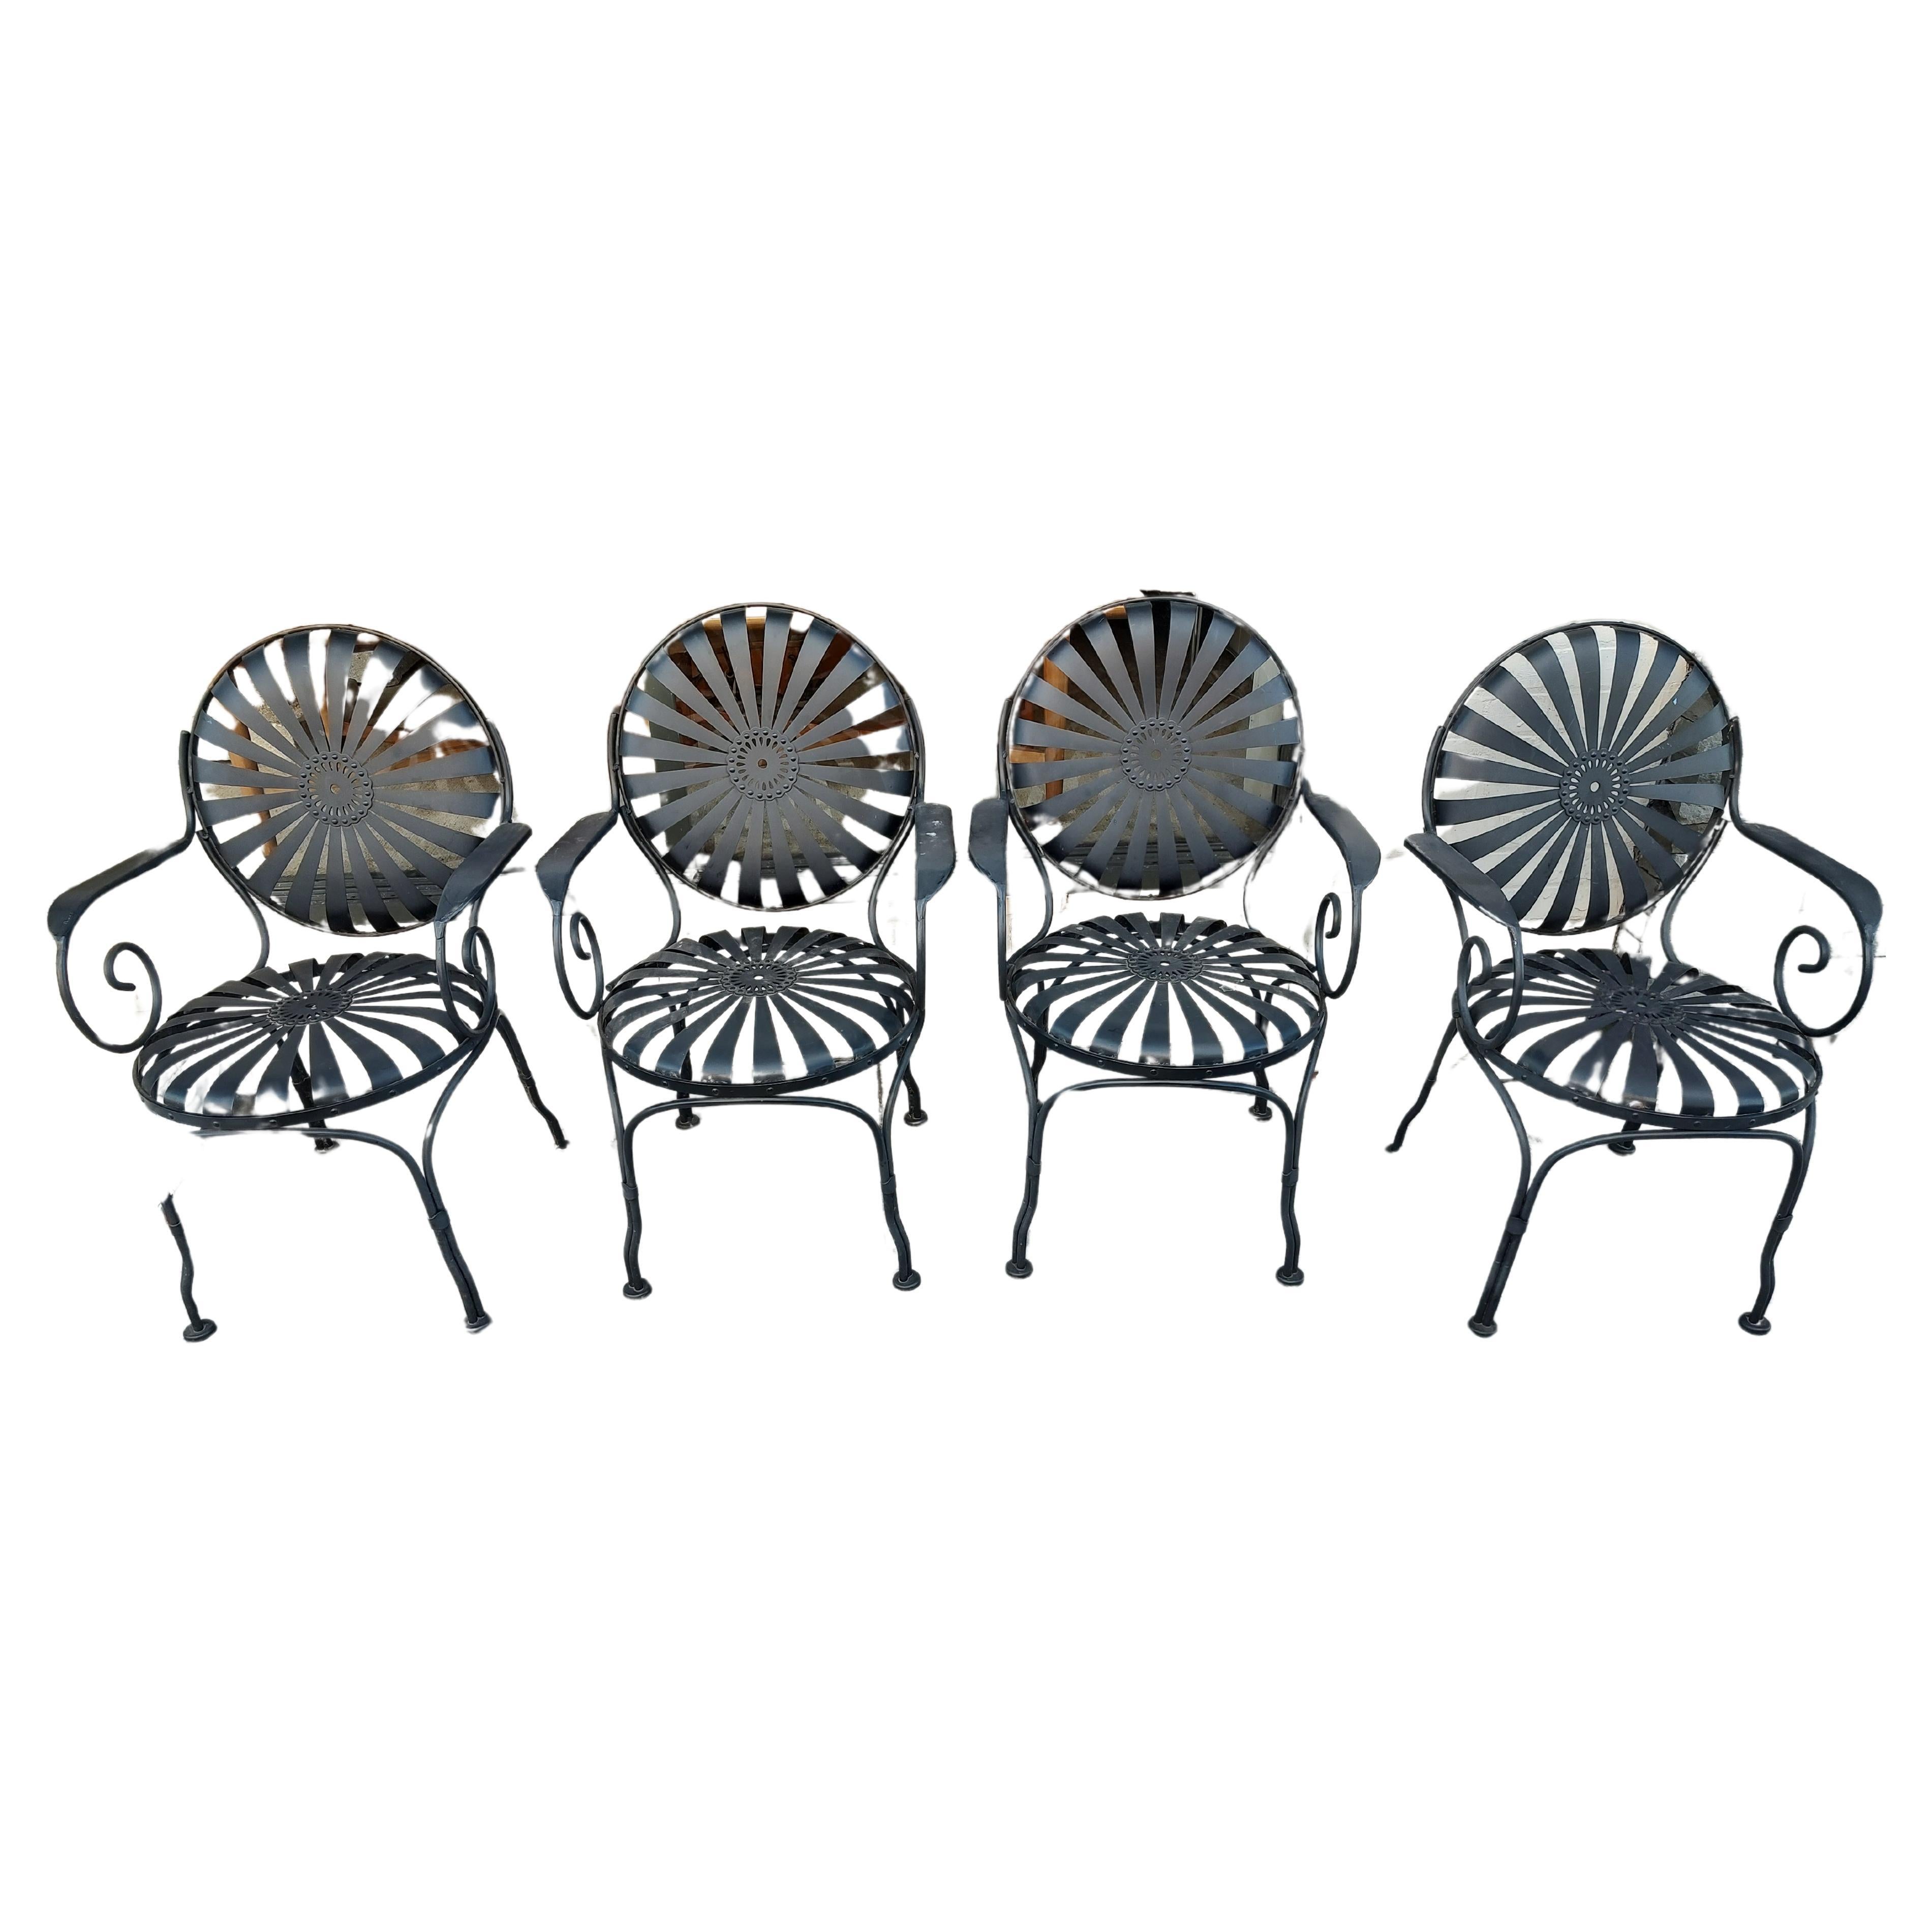 Fabulous set of 4 French iron armchairs in the style of sunburst or sunflowers with spring steel seats and backs. Restored about 4 yrs. ago and kept in an enclosed porch since. Bits of rust on undersides of the seats. No structural damage or bad